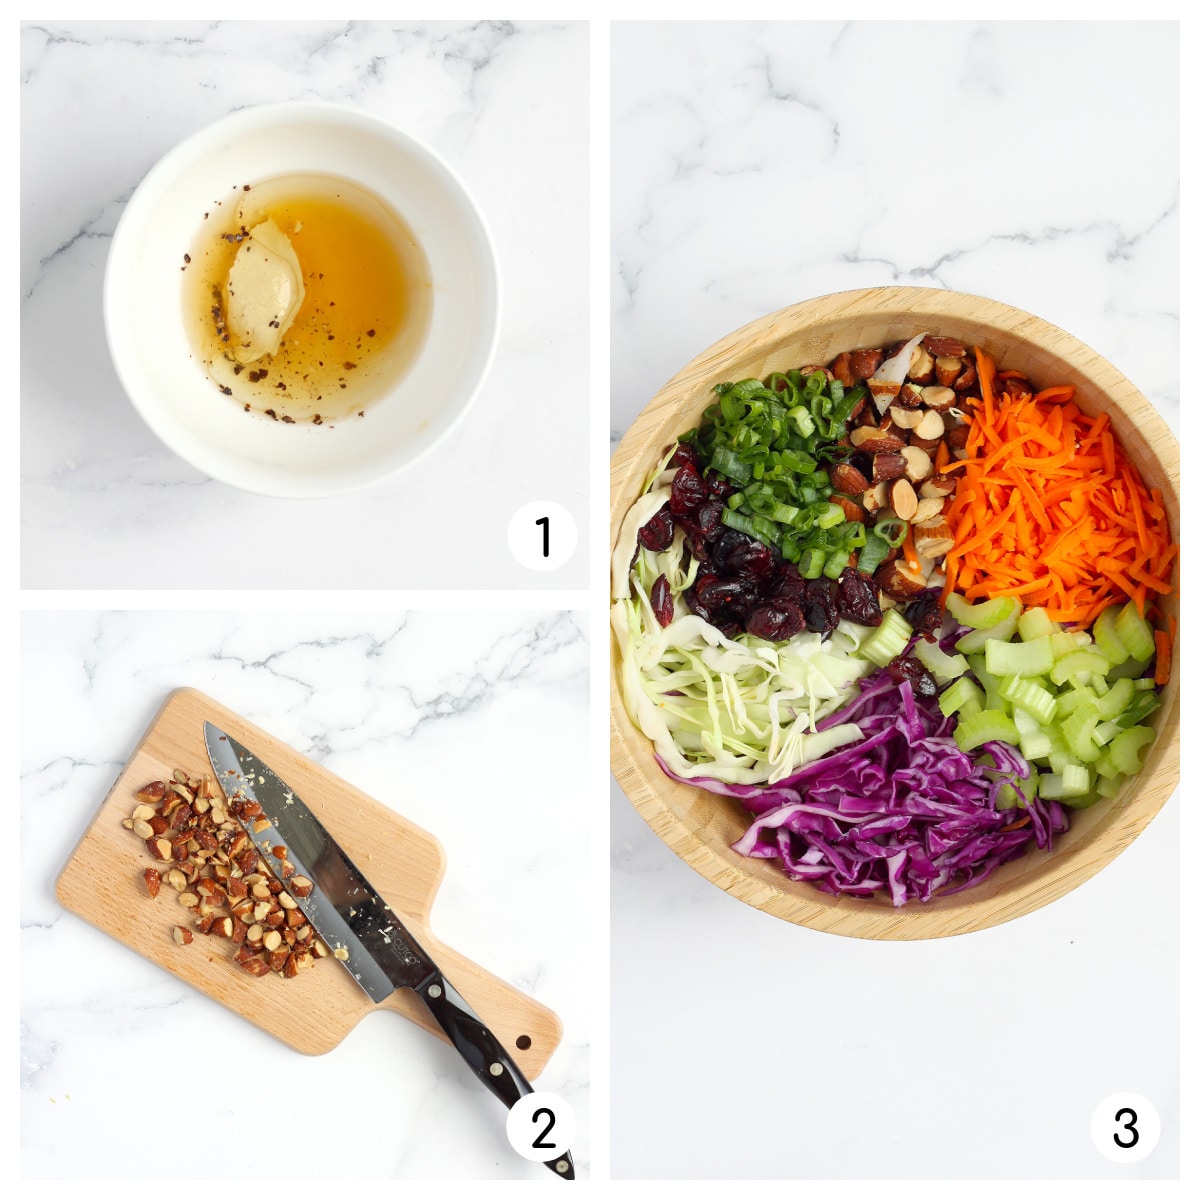 Process shots showing how to make homemade coleslaw with vinegar dressing.